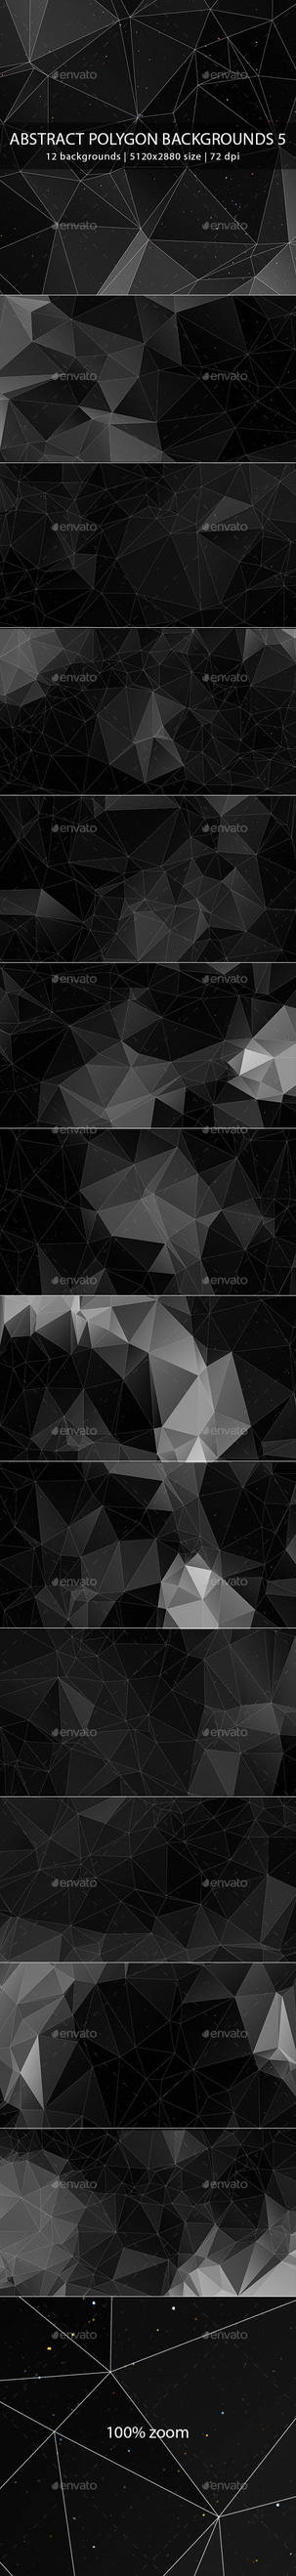 Abstract Polygon Backgrounds 5